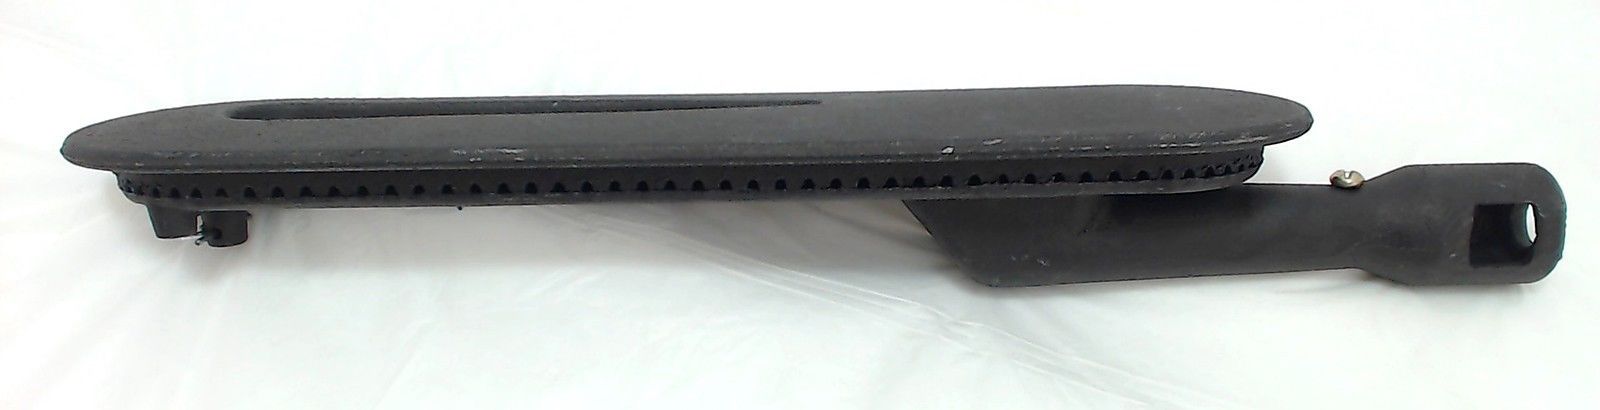 Cast Iron Burner for Charbroil, Turbo Brand Gas Grills